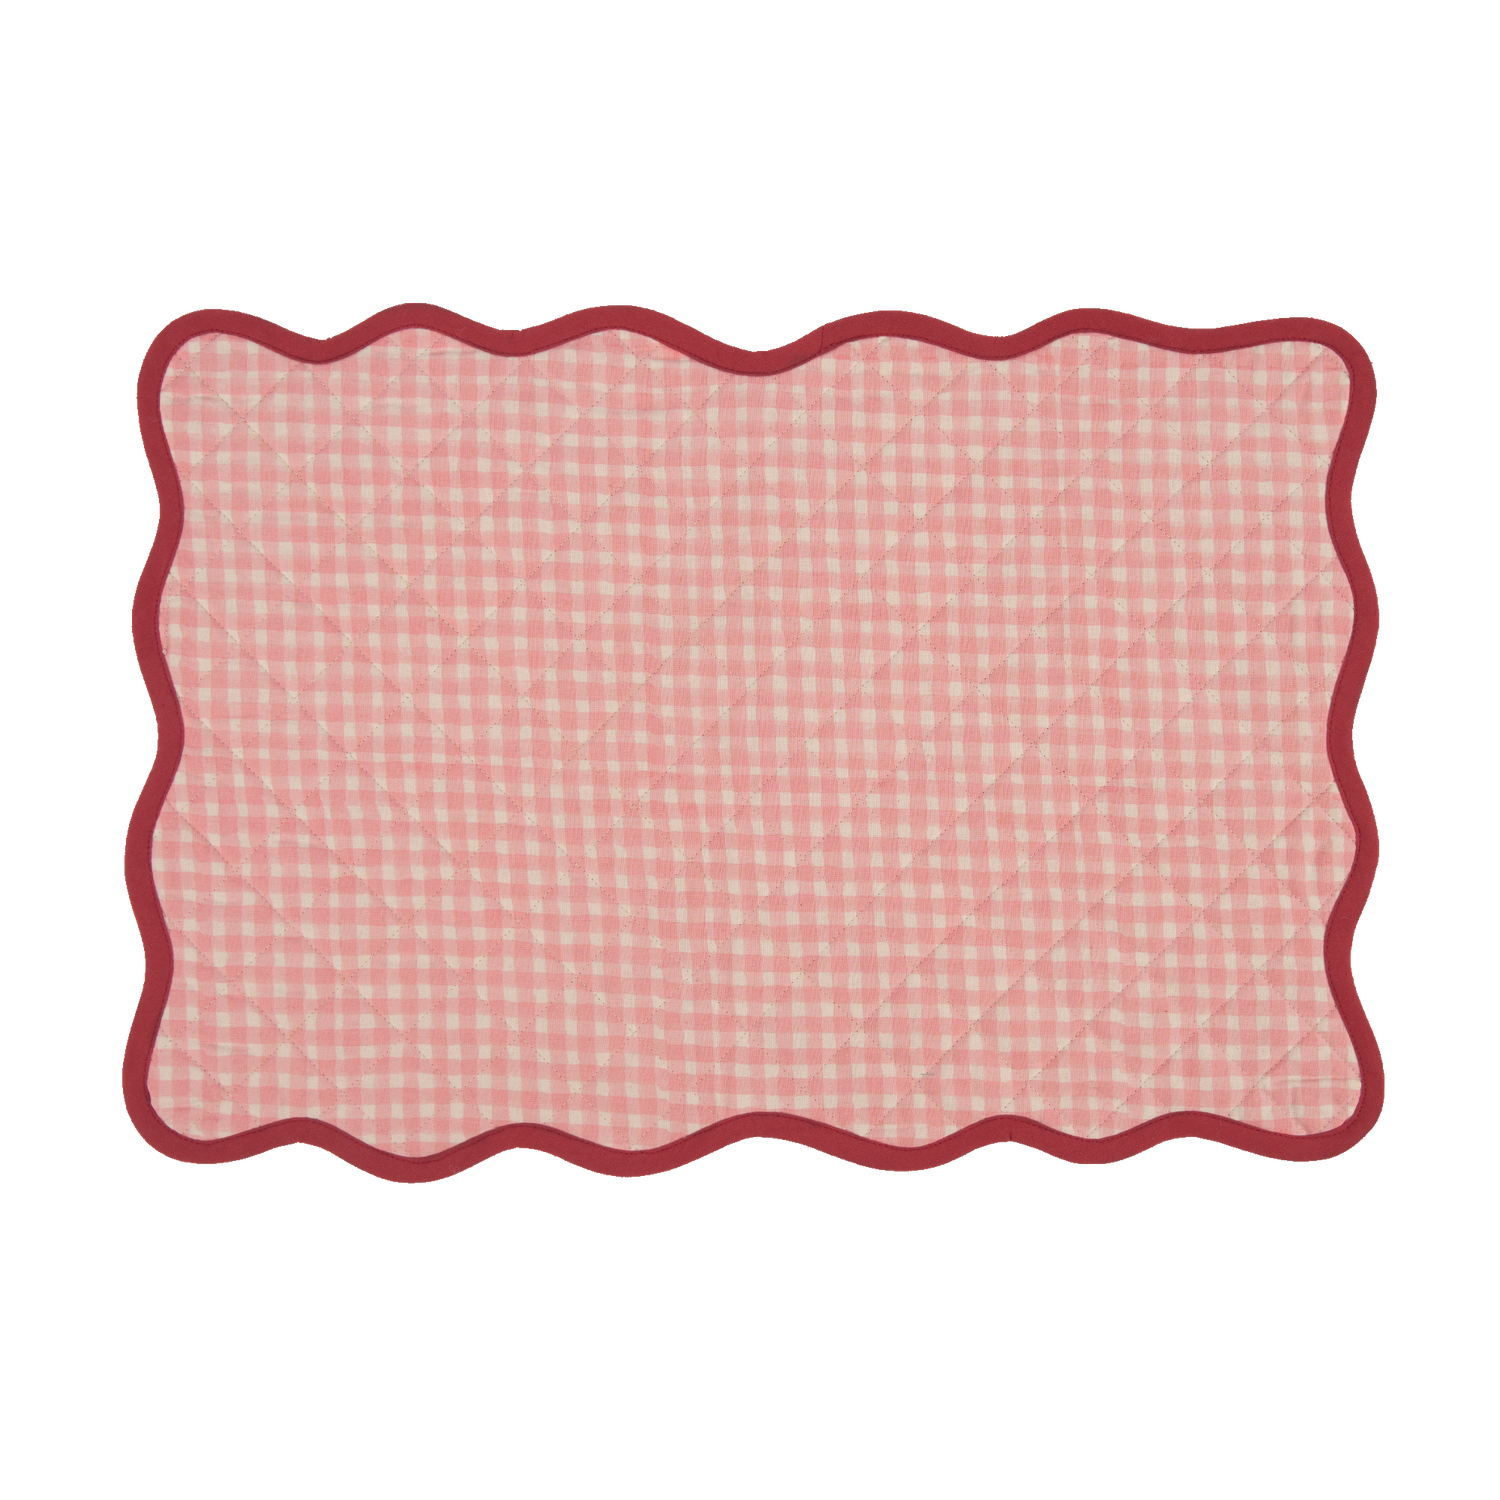 Scallop quilted placemat - Light pink 34x48 cm